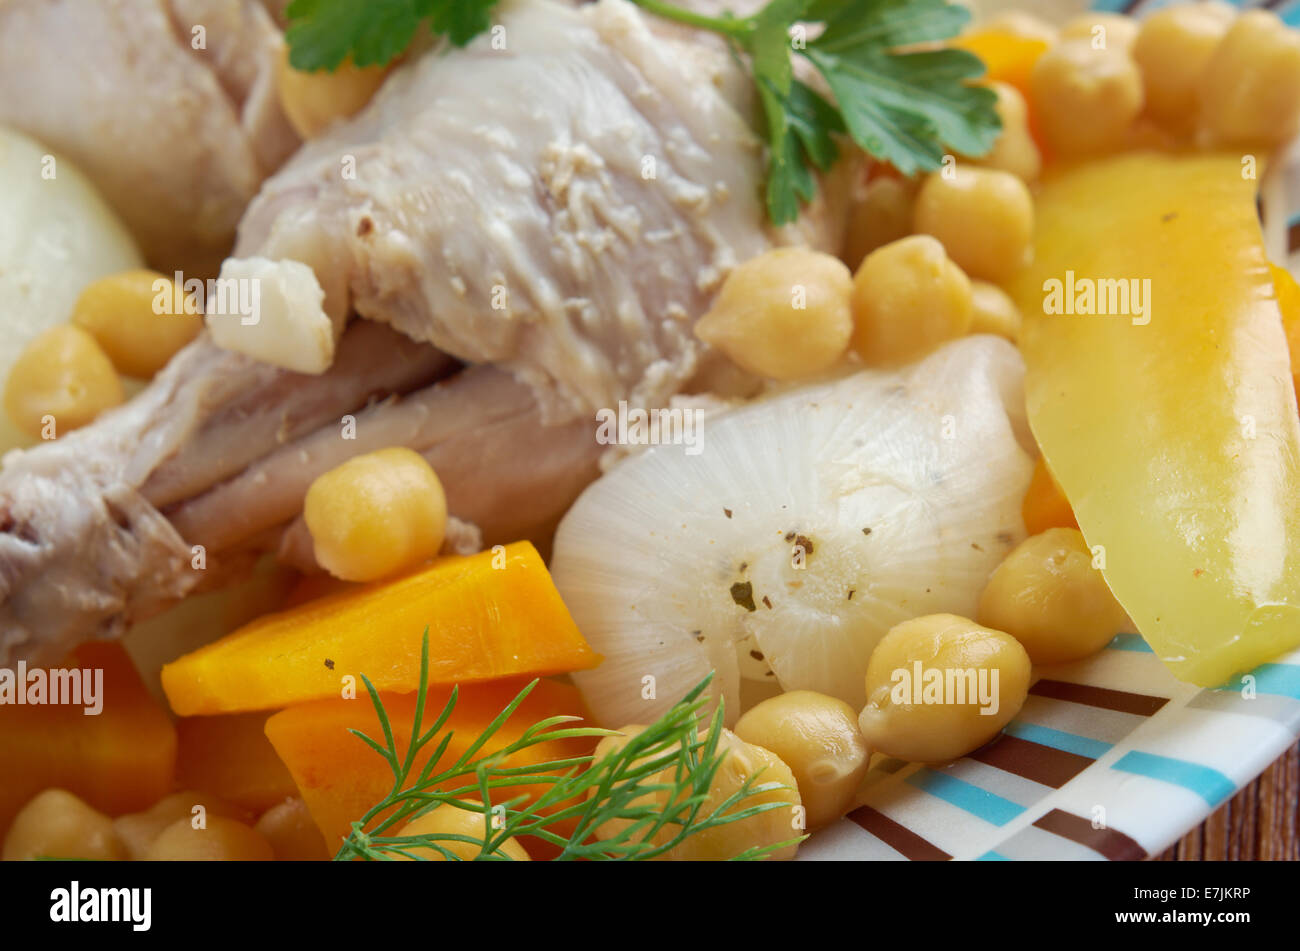 Tajine el besbes  - Maghrib chicken appetizer with vegetables Stock Photo